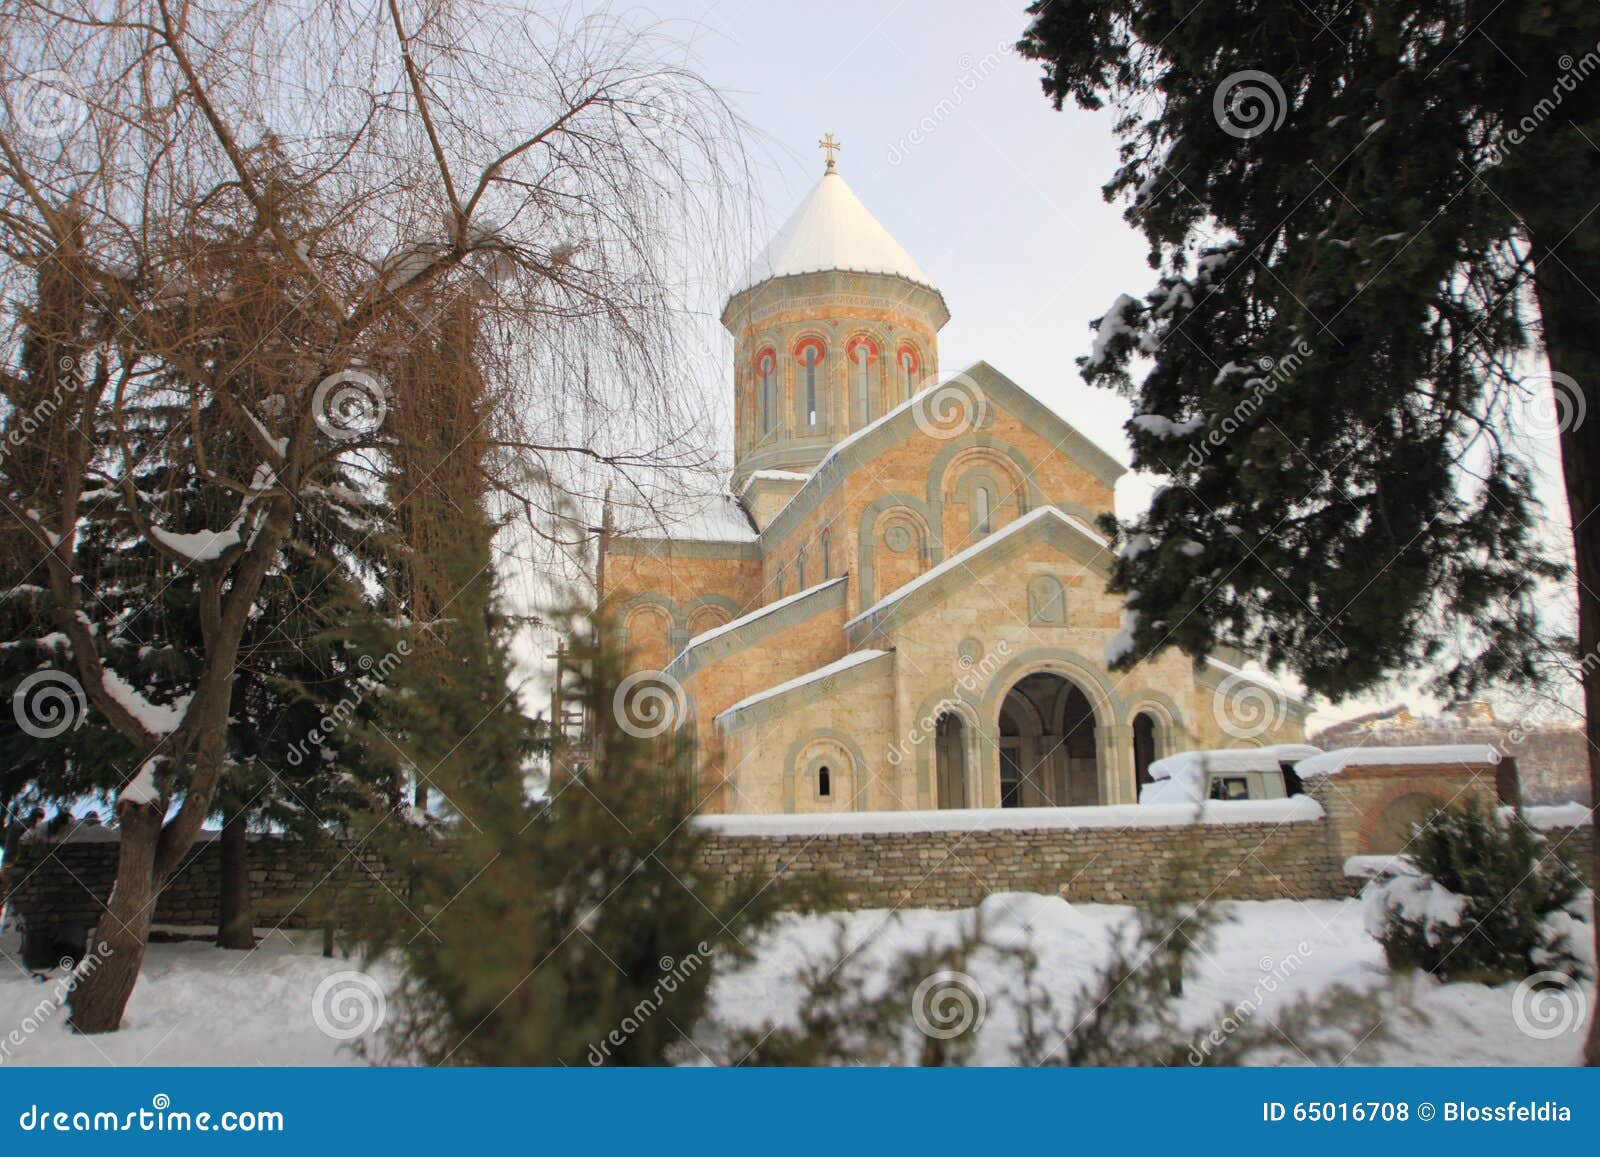 the church in monastery of st. nino at bodbe in winter